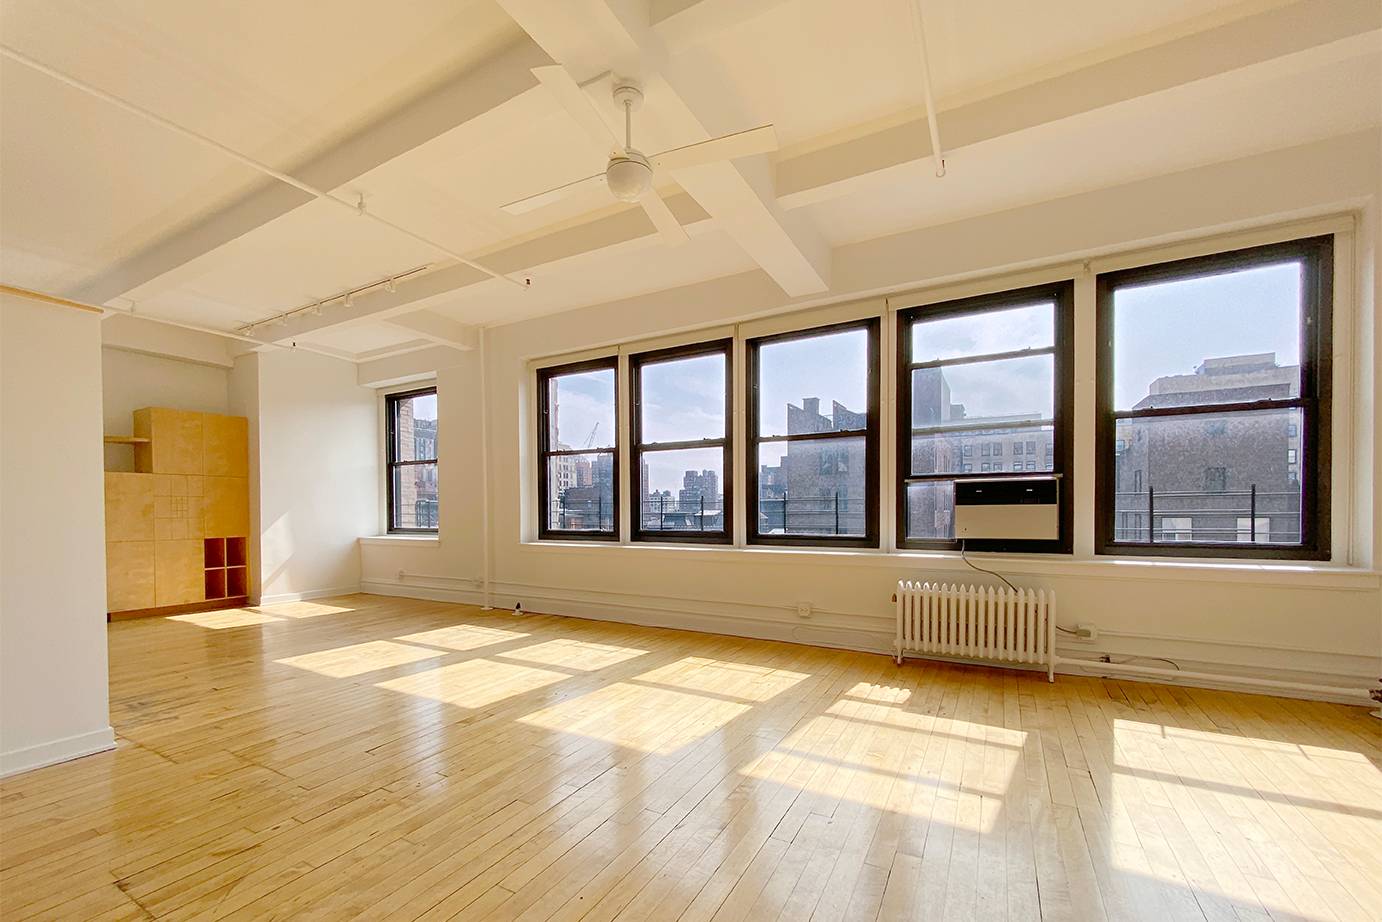 NO BROKER FEE Fabulous Loft with Light, Views, and best Flatiron Location makes this the perfect new home.